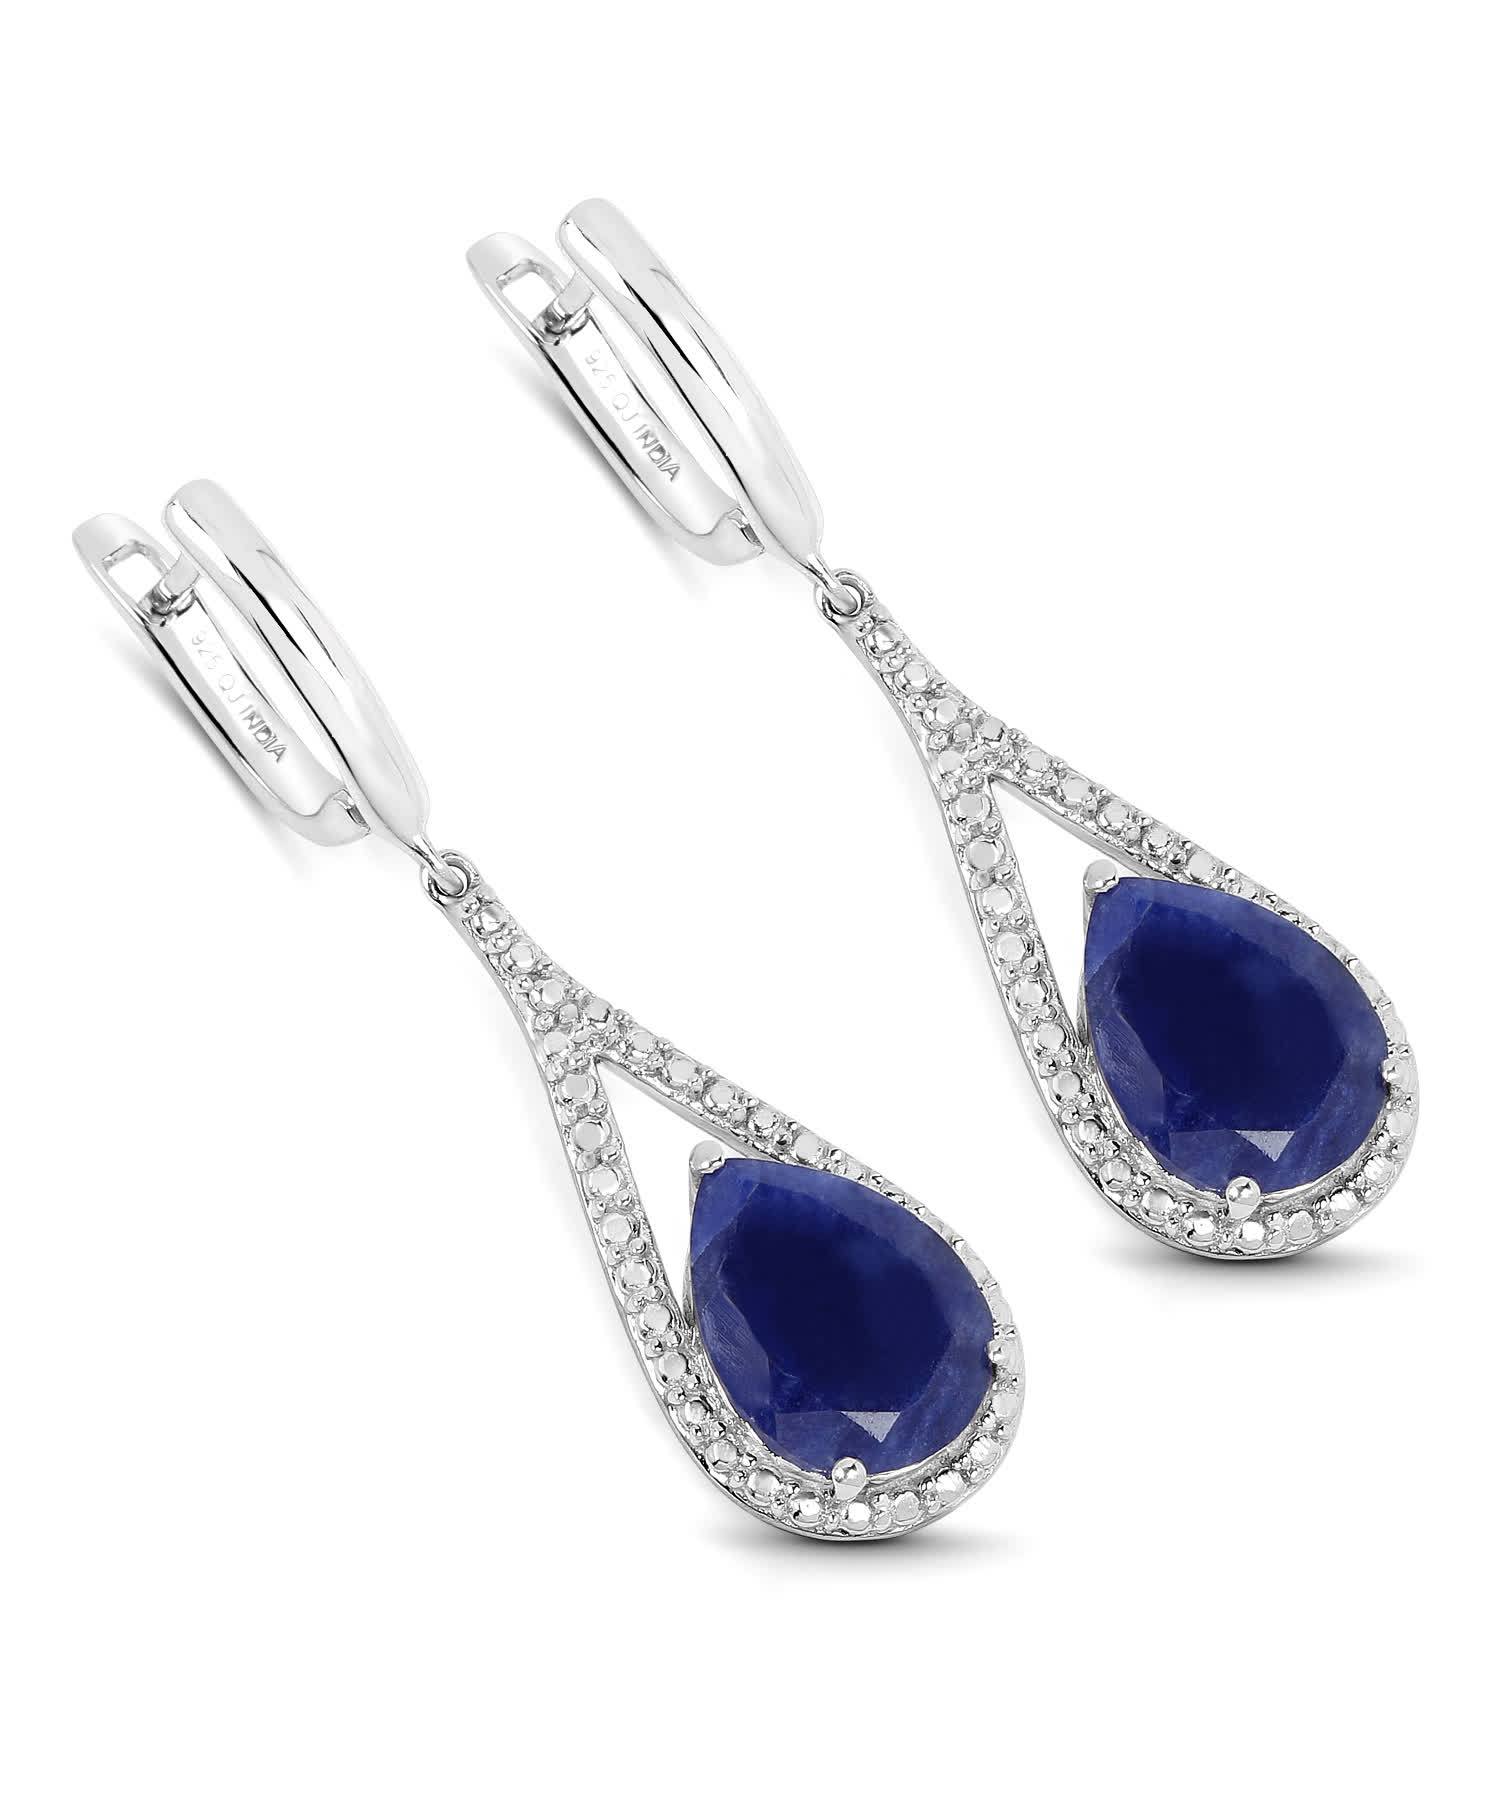 4.59ctw Natural Navy Aventurine Rhodium Plated 925 Sterling Silver Drop Earrings View 1